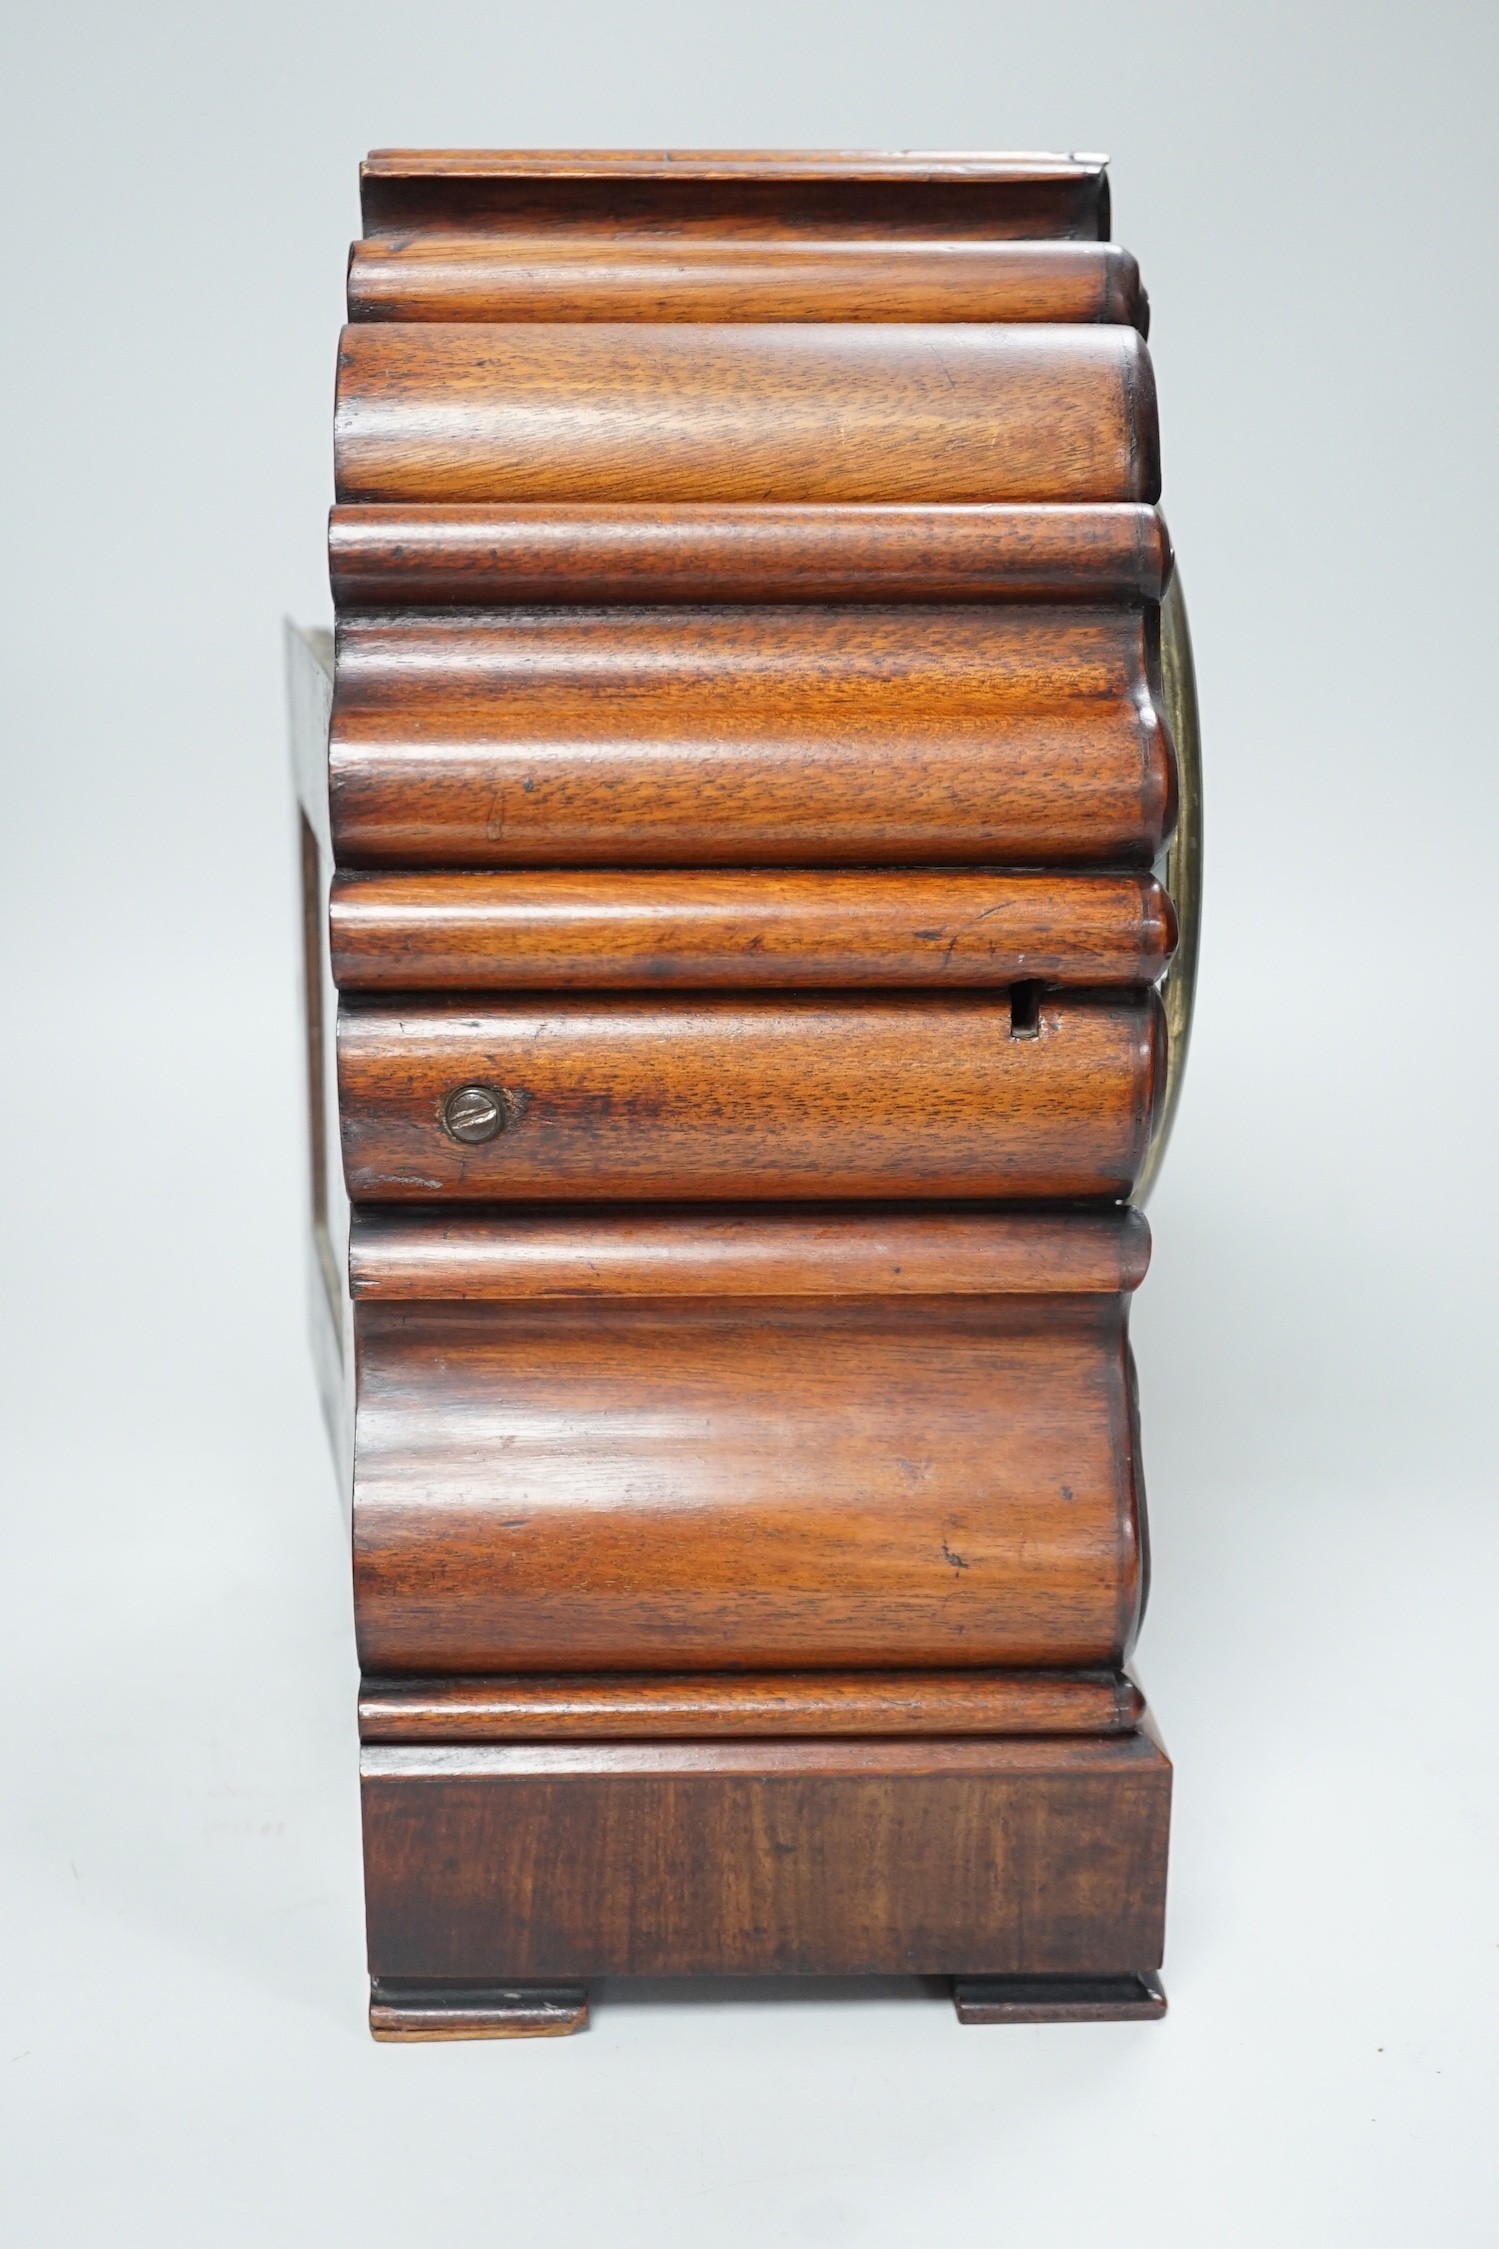 Mason, Ipswich. A 19th century mahogany cased mantel clock with scrolling moulded decoration - 31cm tall